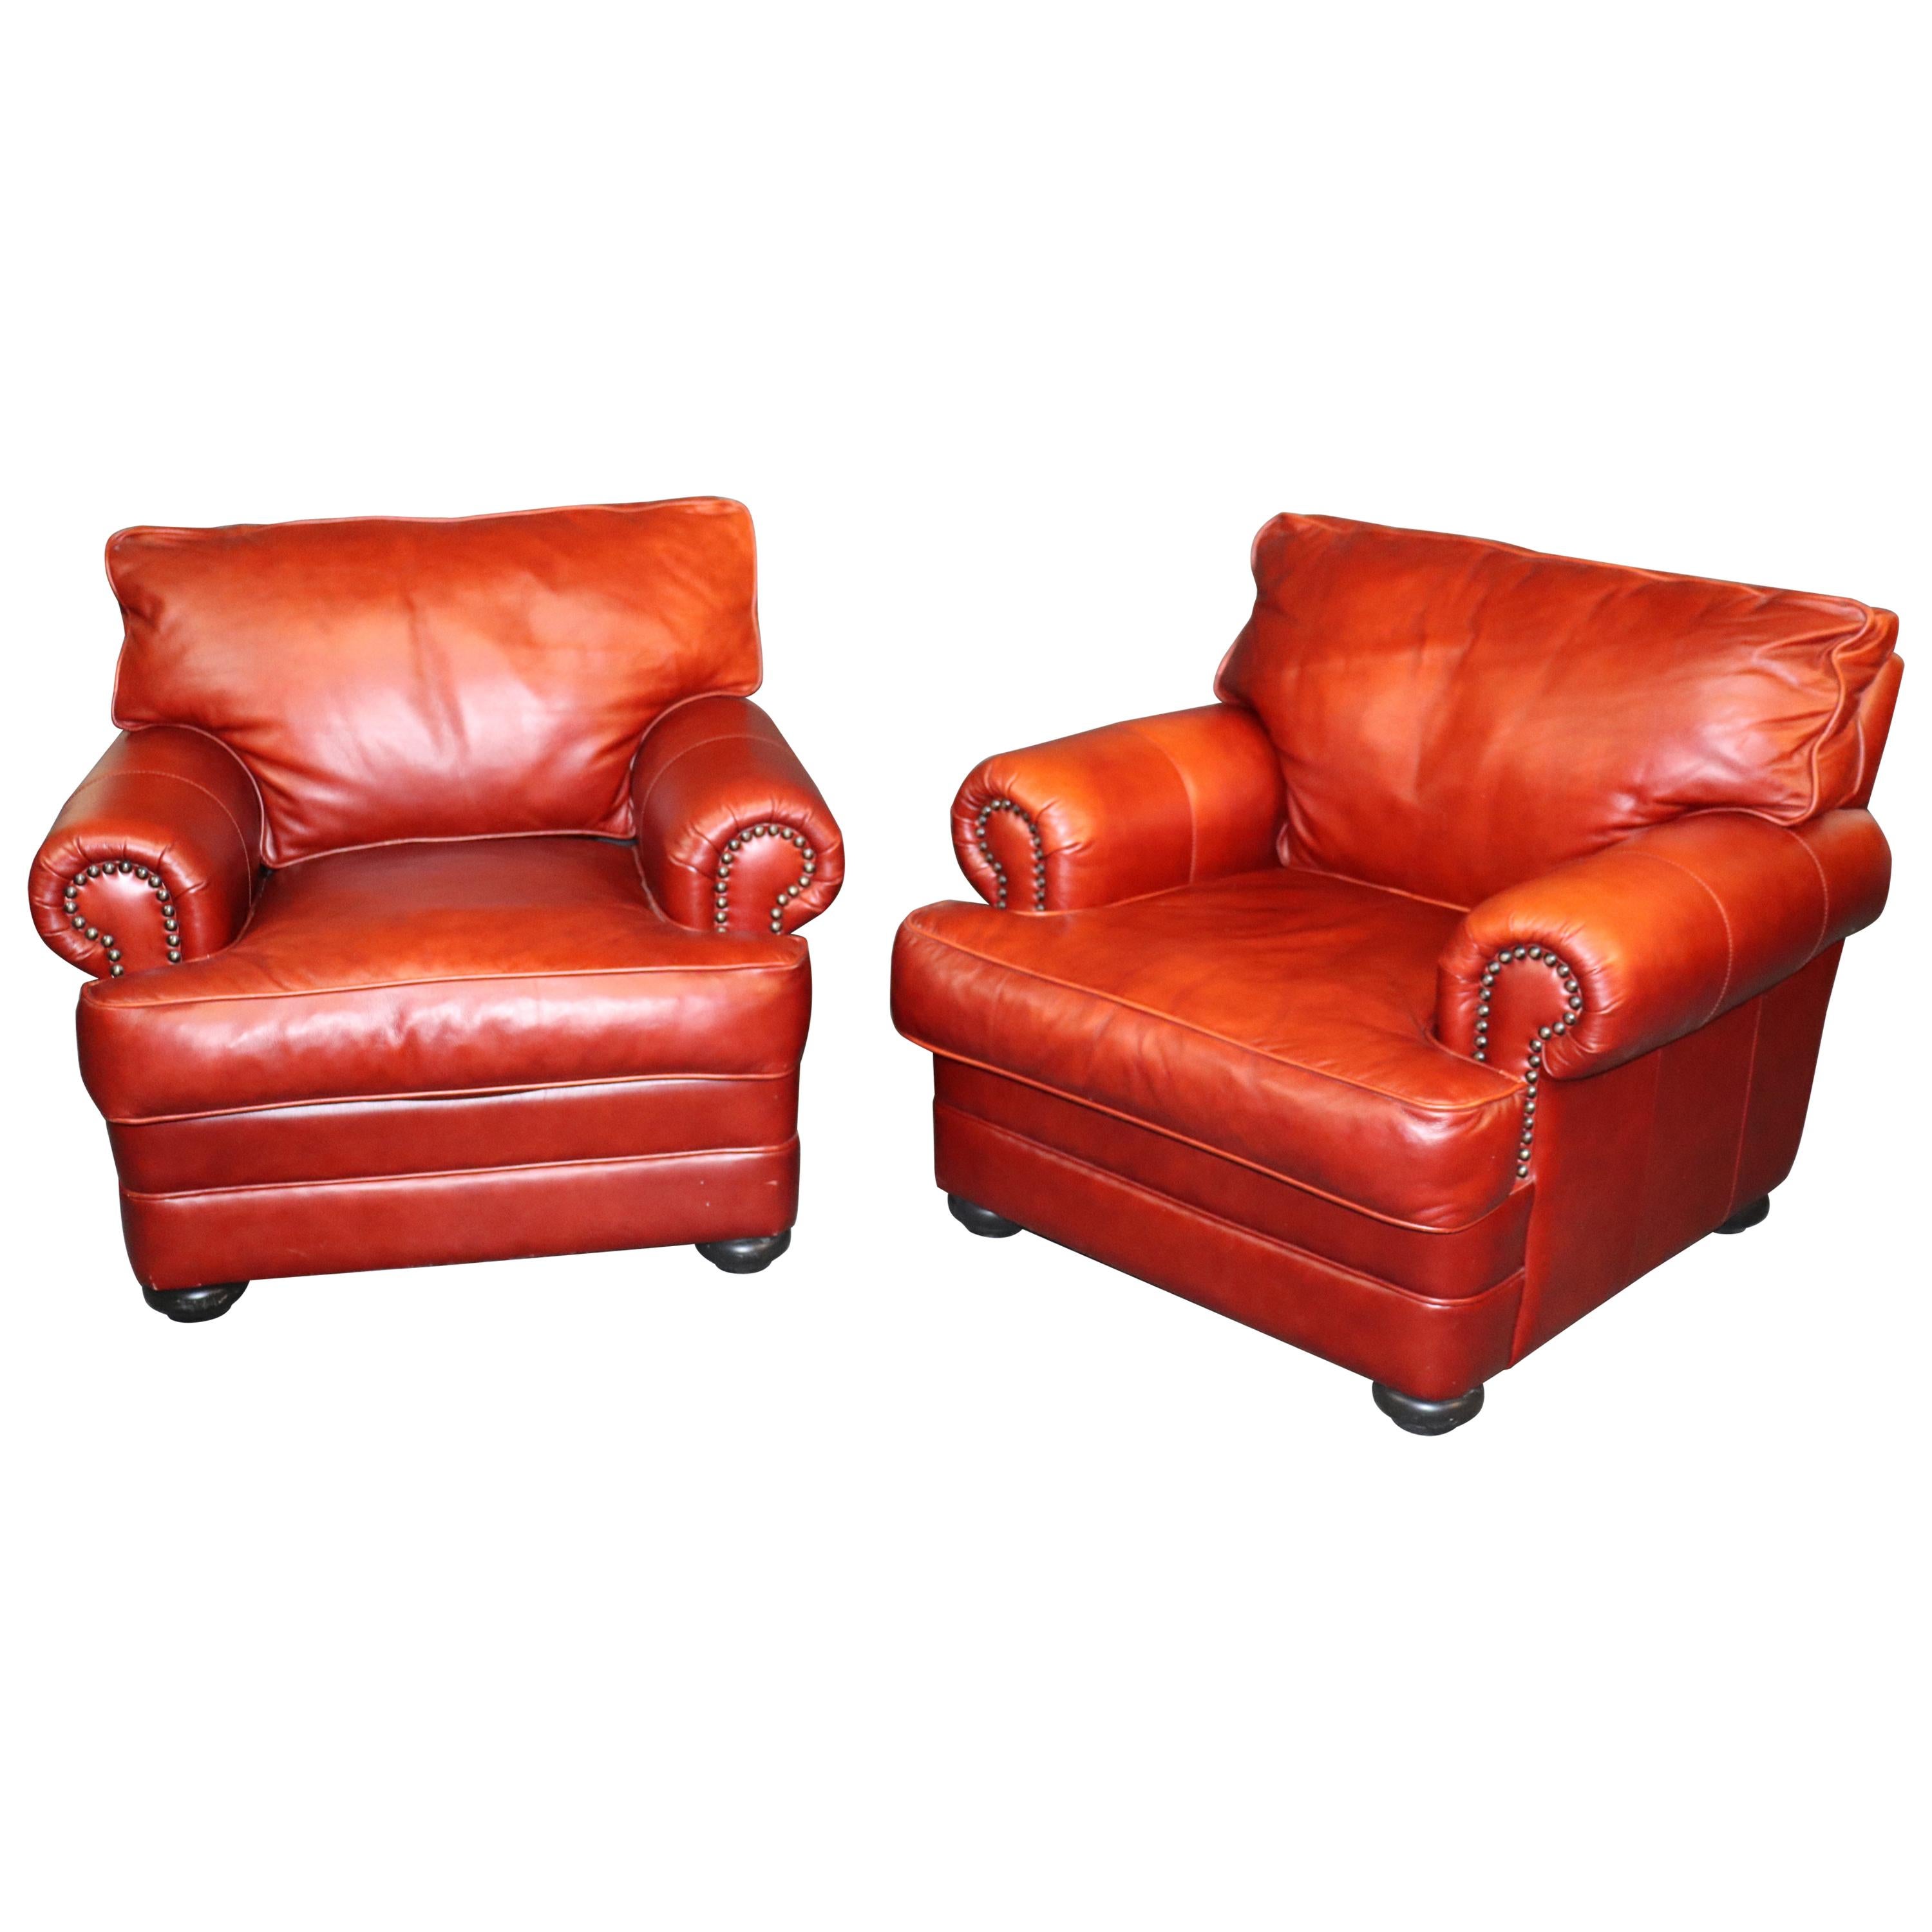 Orange-Red Pair of Custom Made All Genuine Leather Club Chairs